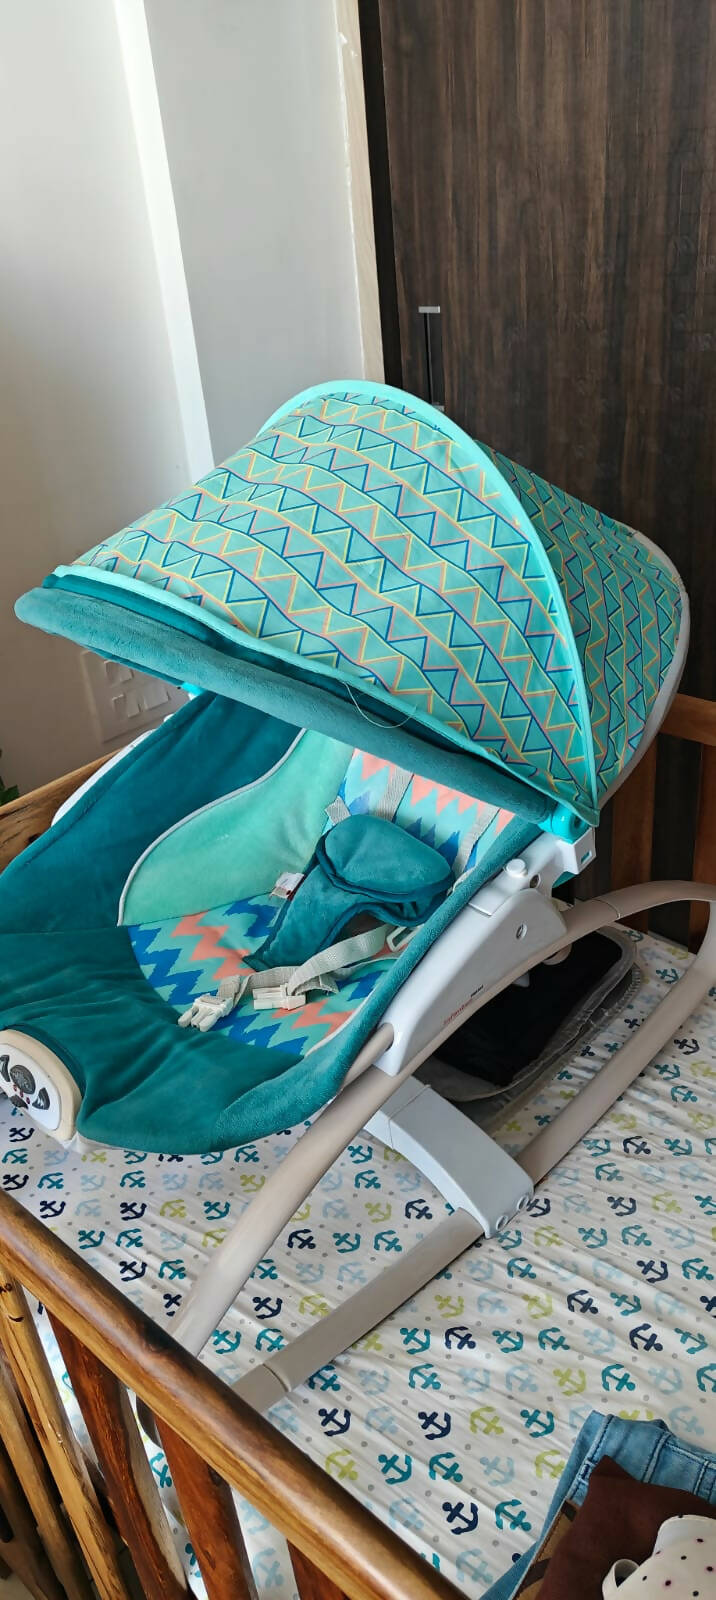 INFANTSO Baby Rocker - Comes with Toys, Battery Operated, Vibration , Music and 1 Pillow - PyaraBaby